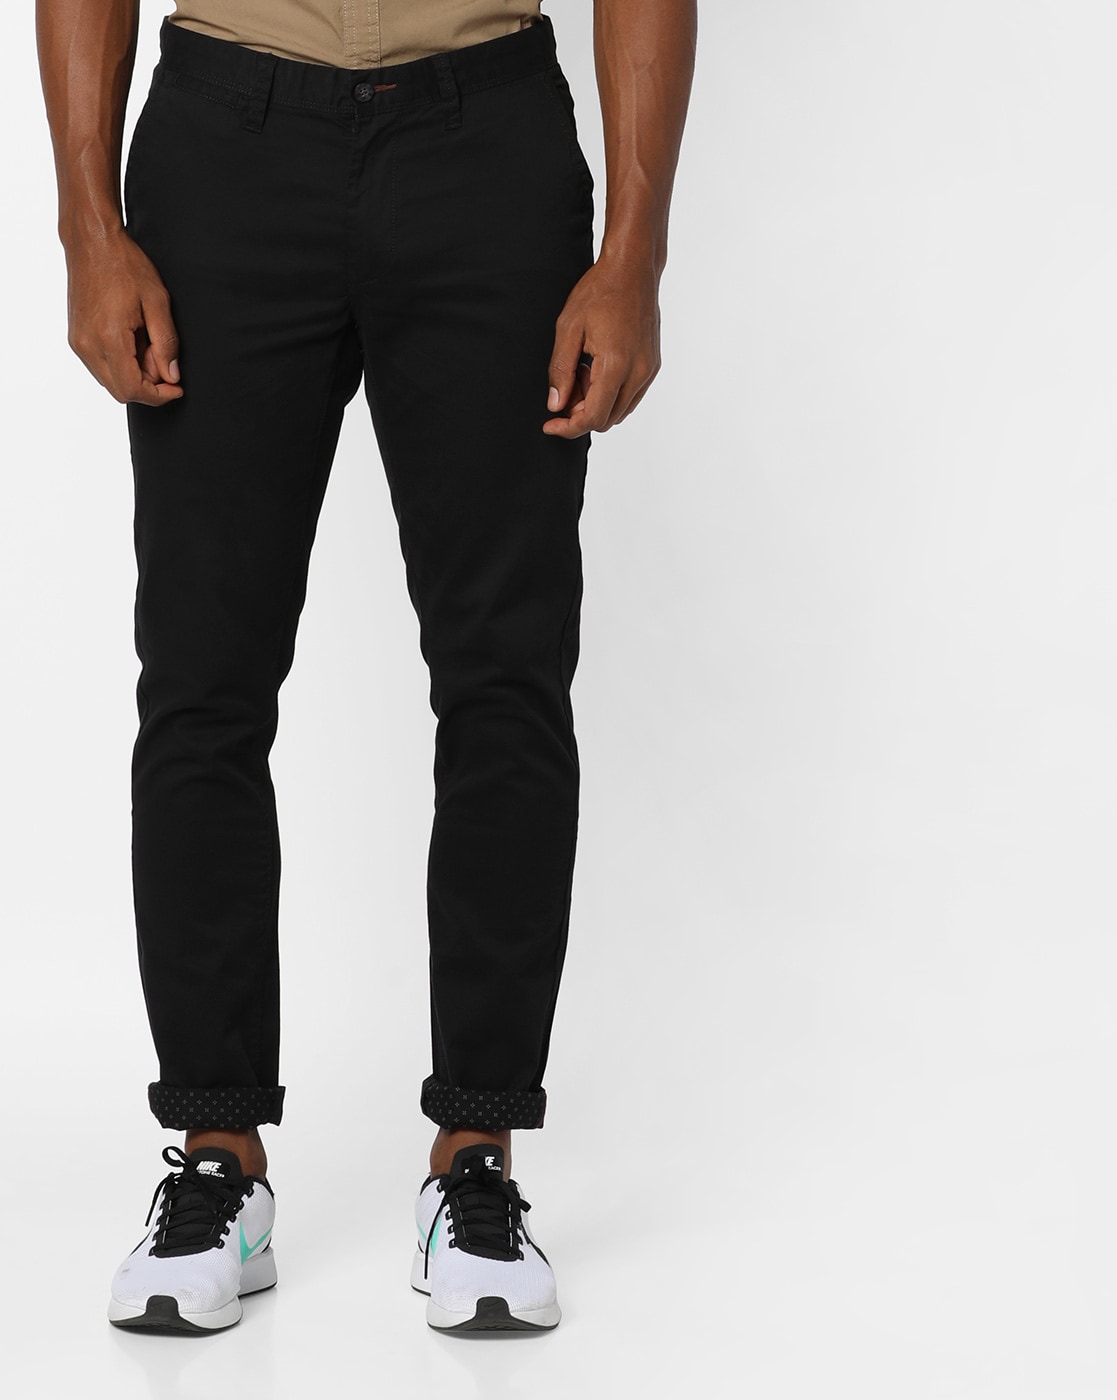 THE BEAR HOUSE Chinos  Buy THE BEAR HOUSE Ardor Edition Men Black Solid  Tapered Fit Casual Chinos Trousers Online  Nykaa Fashion